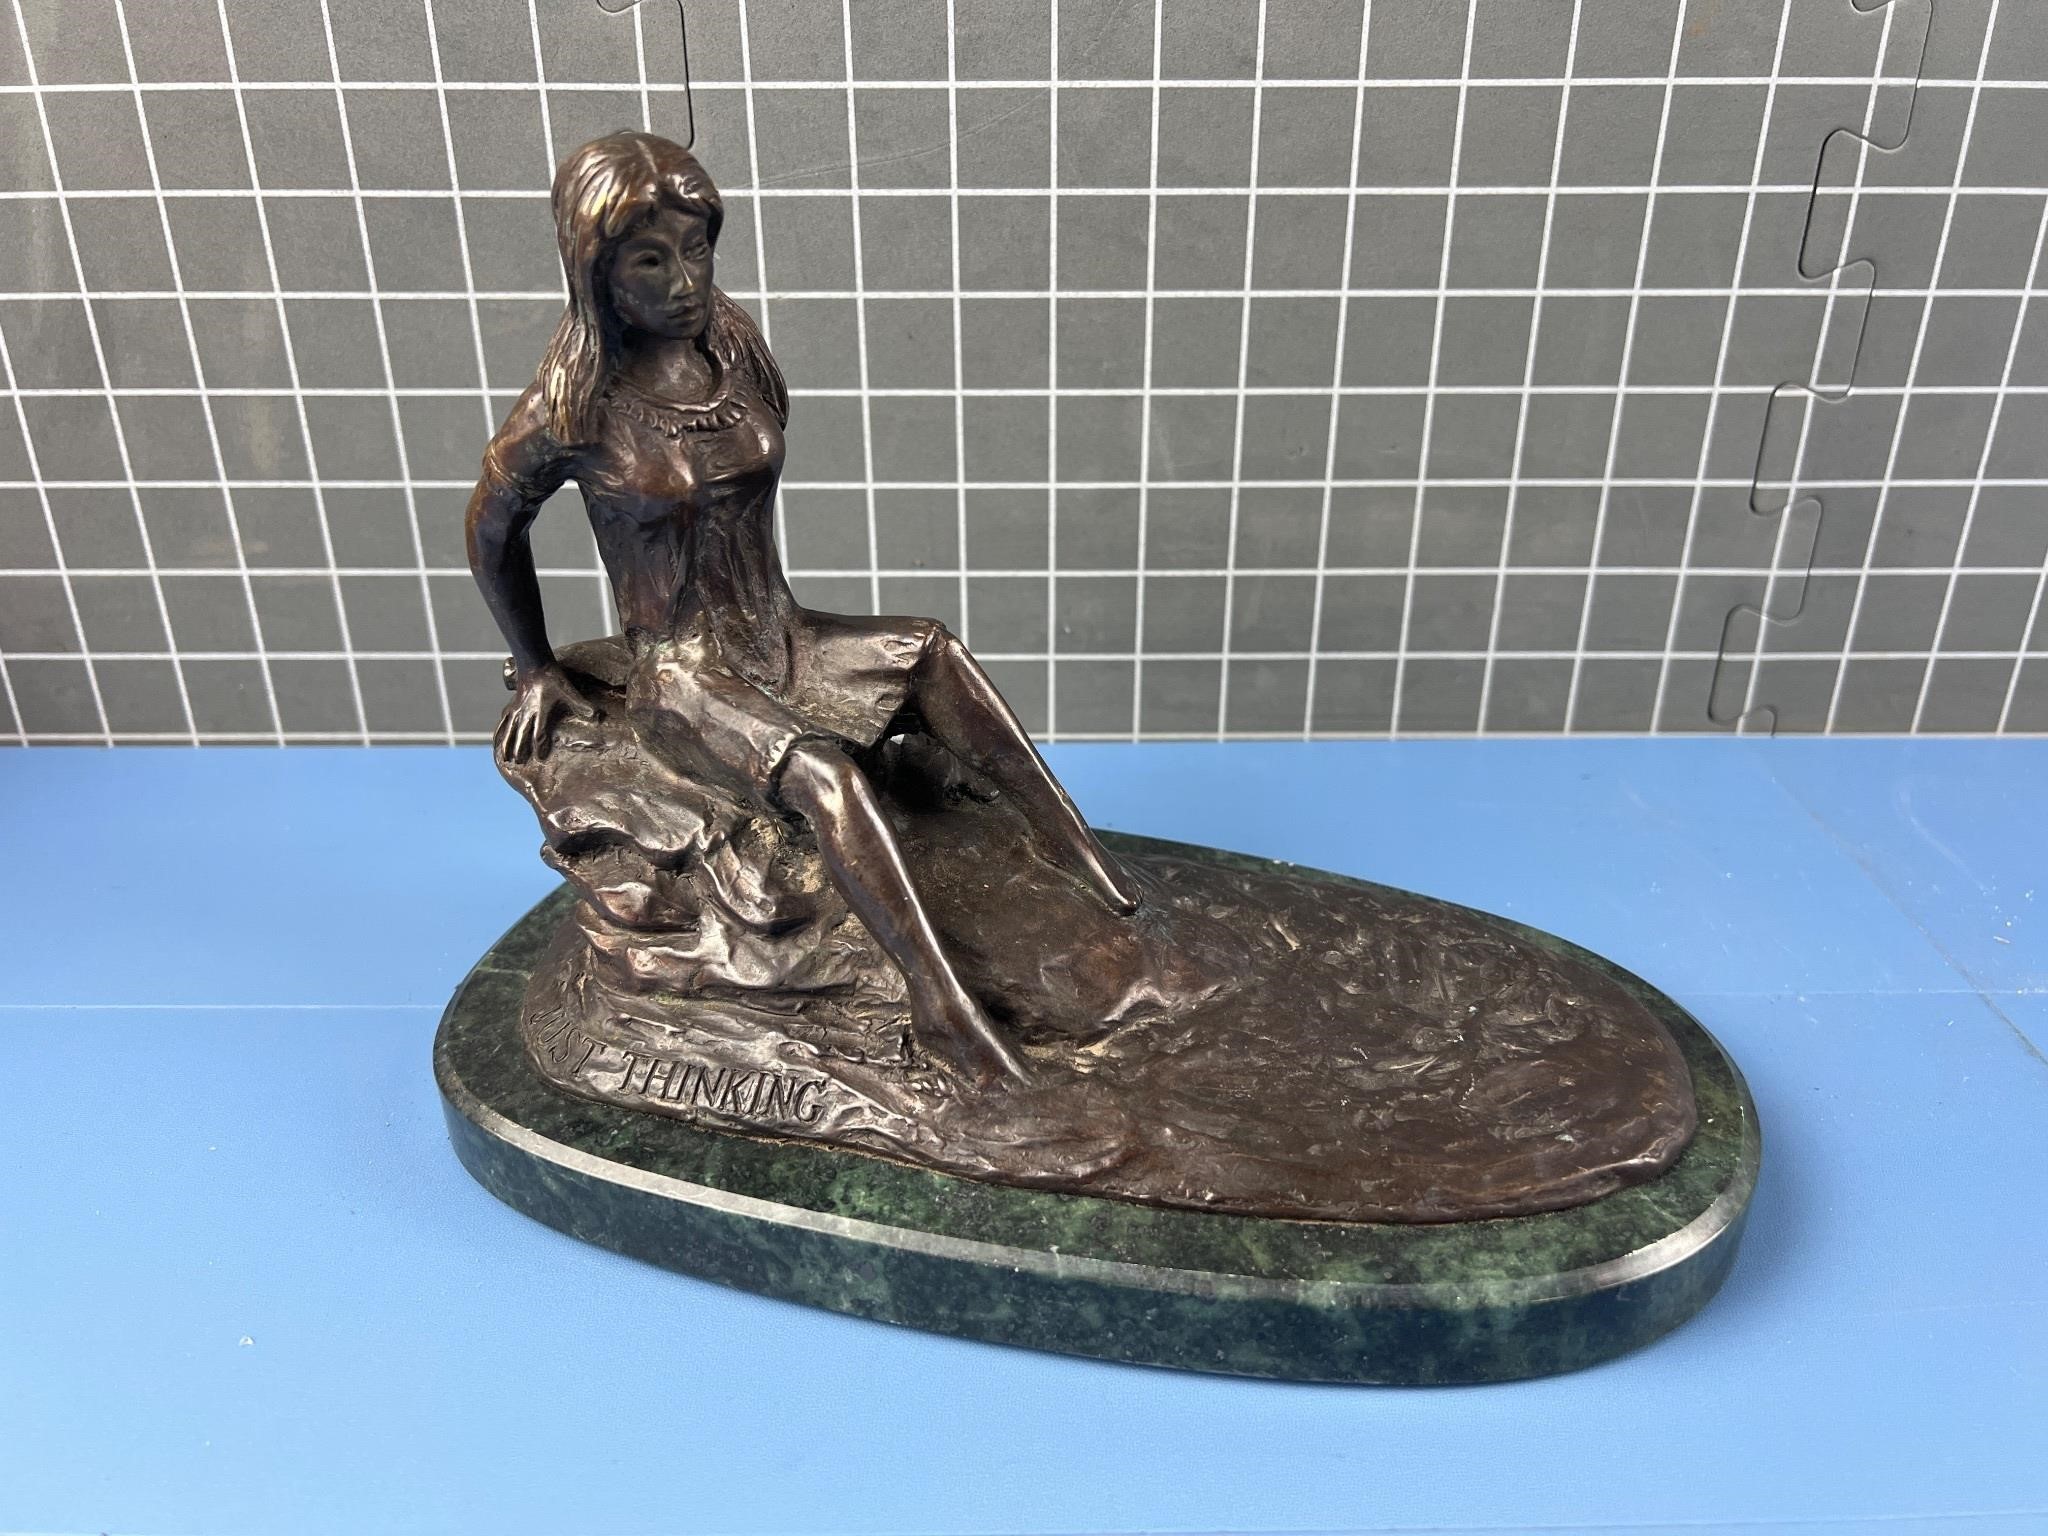 BRONZE & MARBLE STATUE “JUST THINKING“ SIGNED